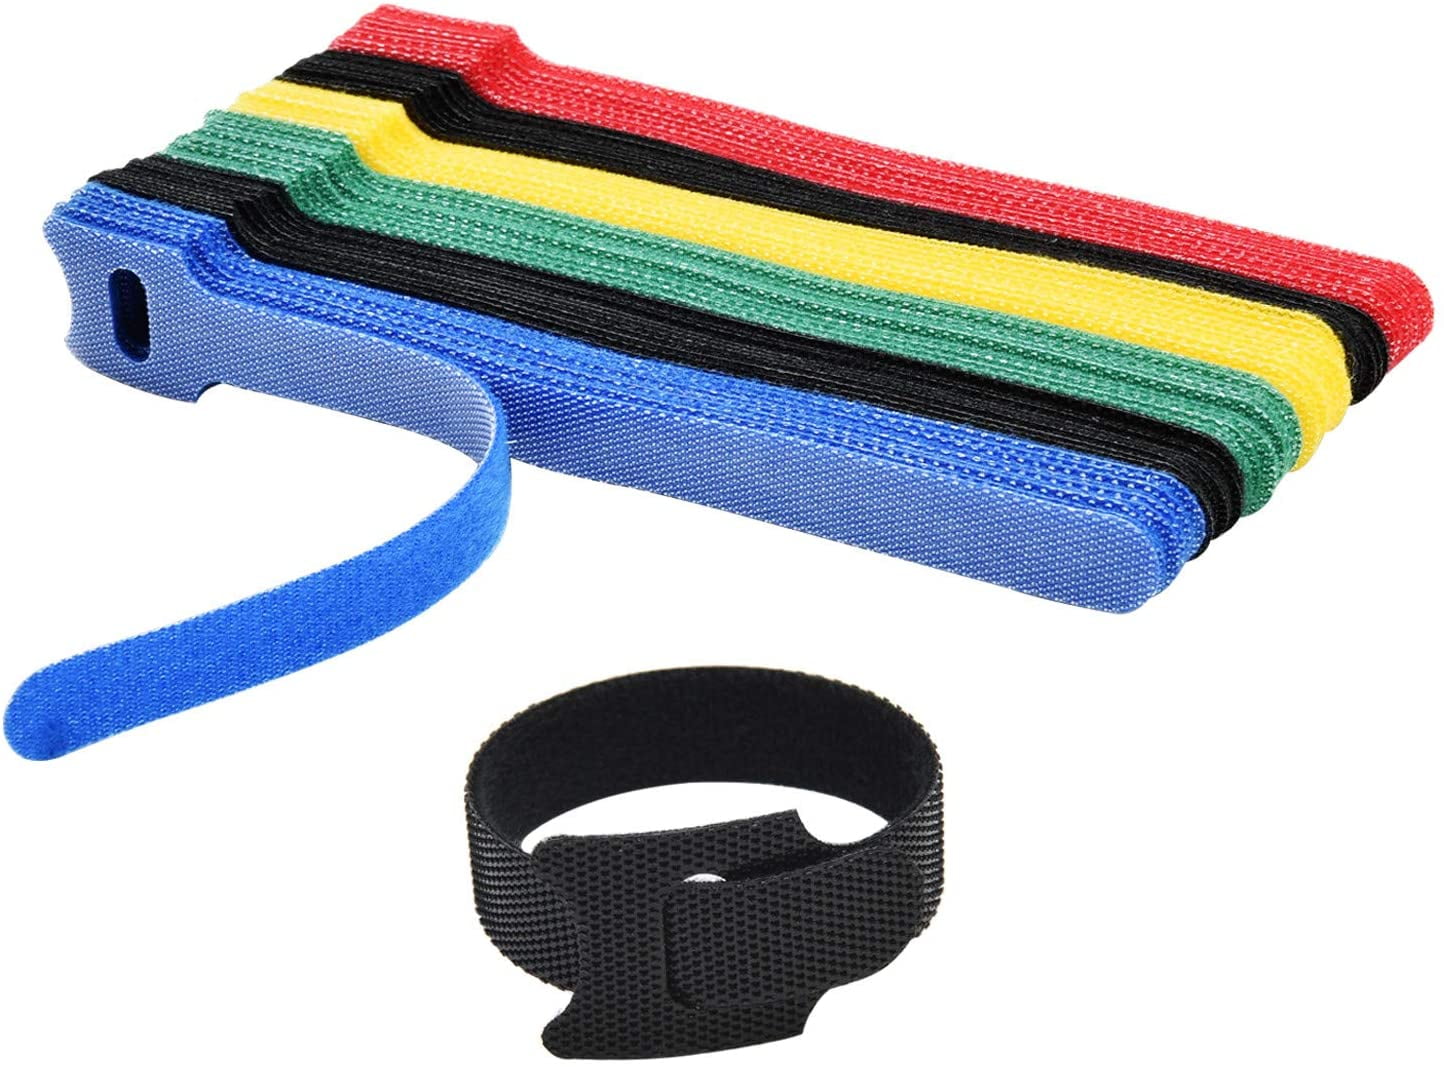 10pcs Reusable Fastening Cable Straps Hook Loop Cables Tie Wrap Secure Strap NEW 